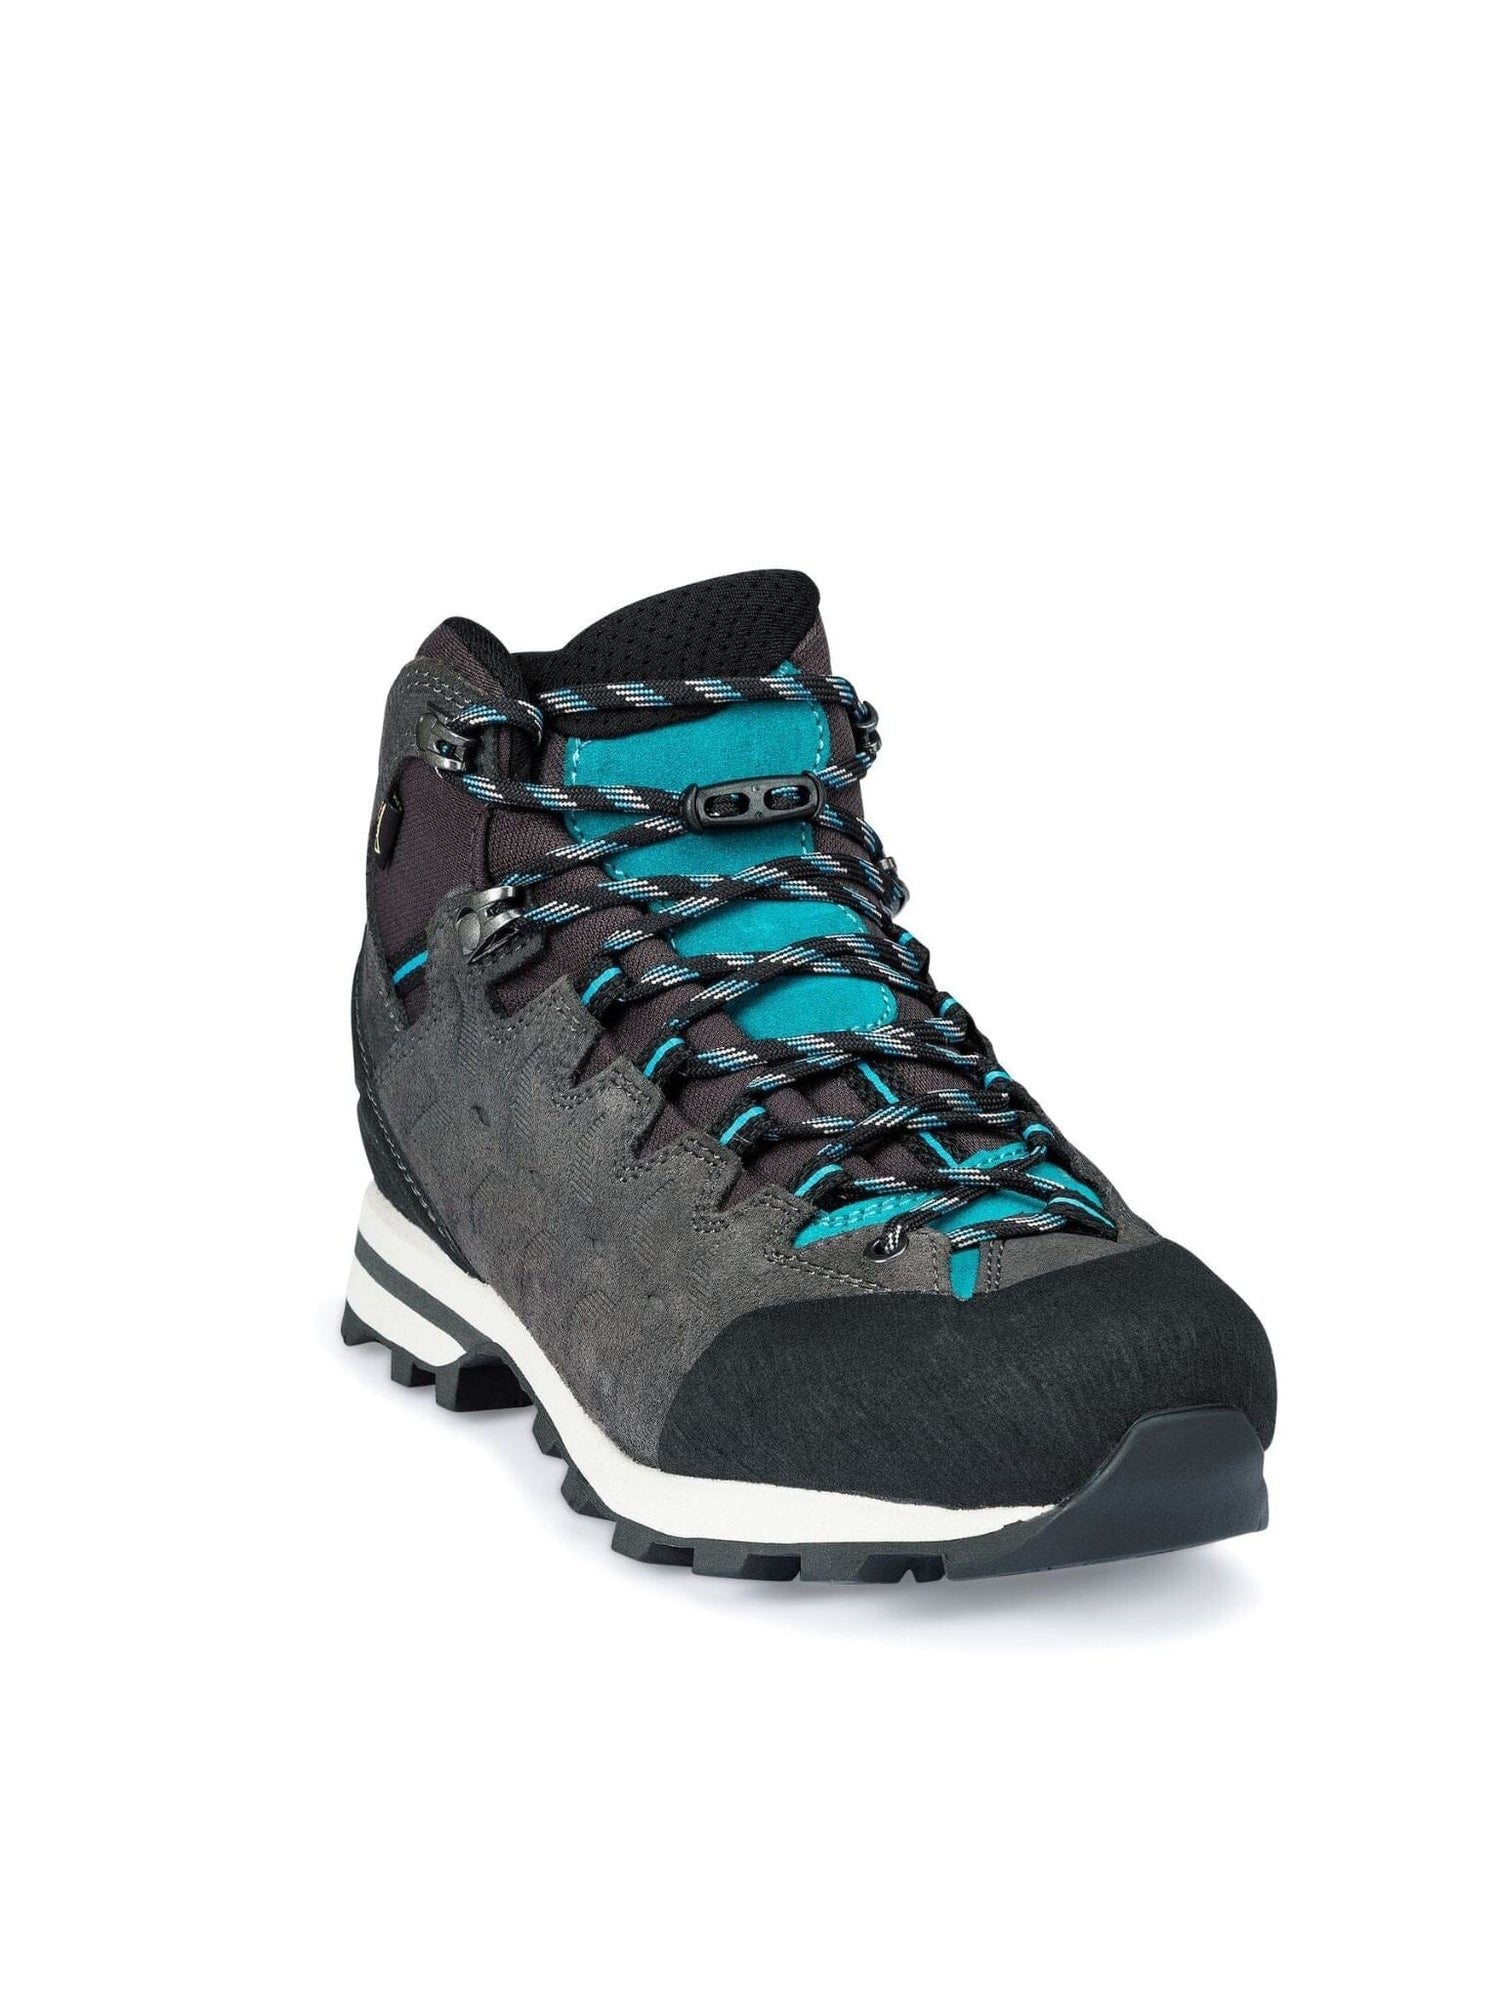 Hanwag W's Makra Light GTX - Leather Working Group -certified leather Asphalt/Bluegreen Shoes